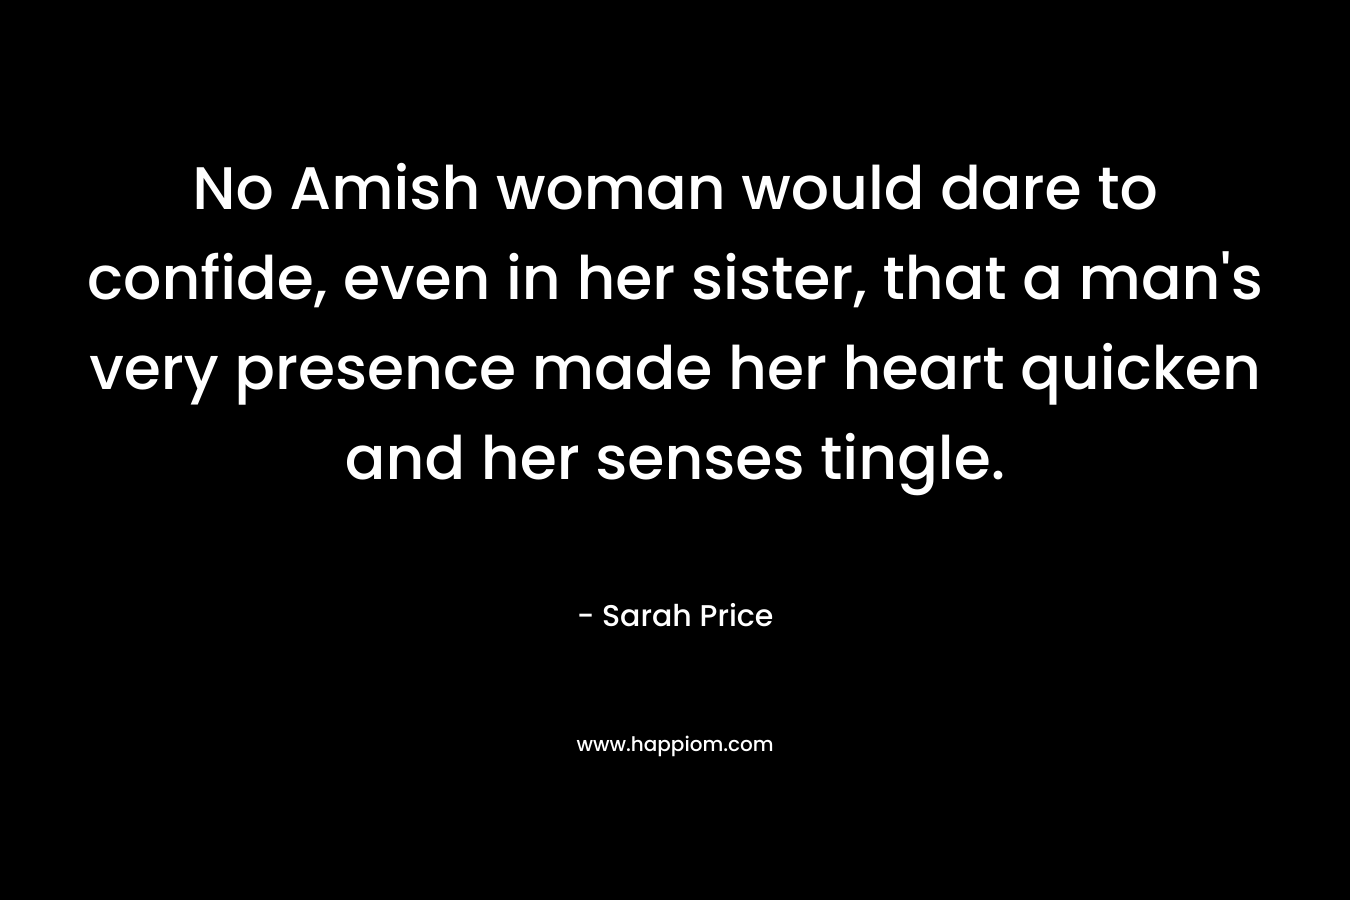 No Amish woman would dare to confide, even in her sister, that a man’s very presence made her heart quicken and her senses tingle. – Sarah Price